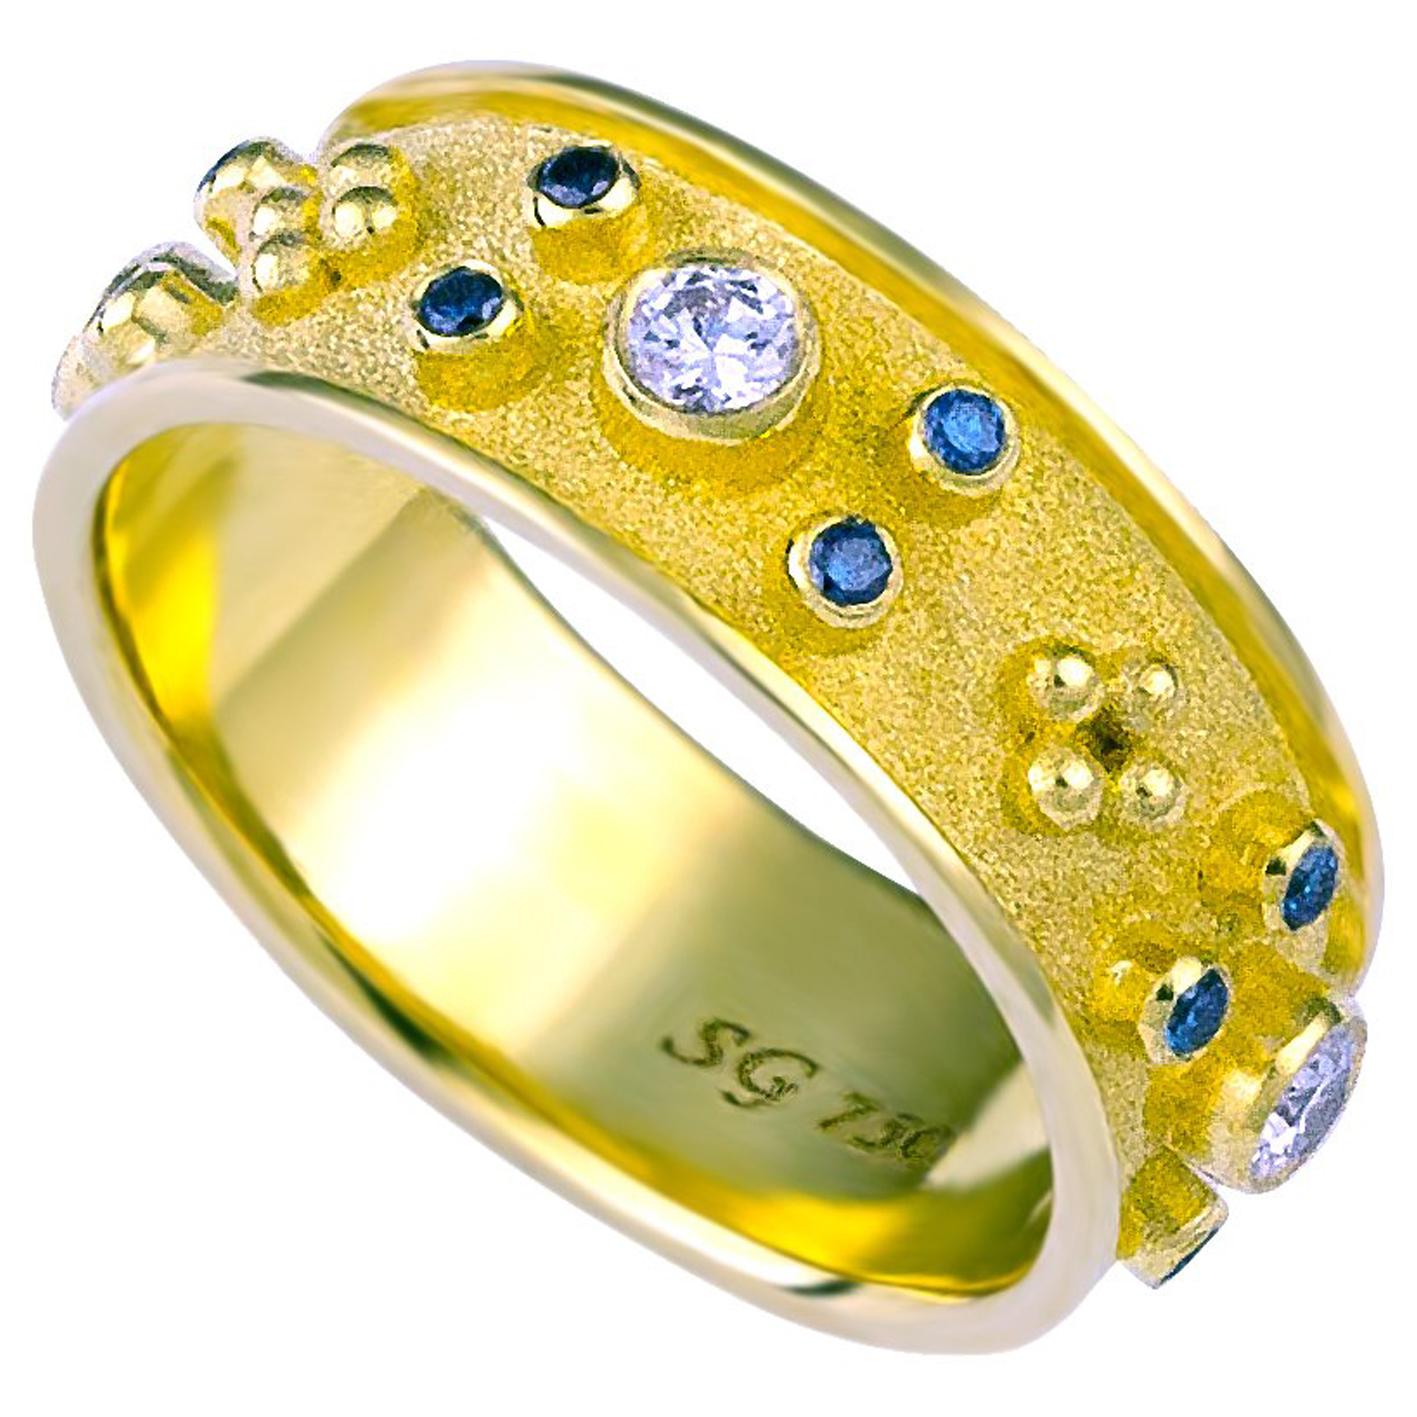 Georgios Collections 18 Karat Yellow Gold Blue and White Diamond Band Ring